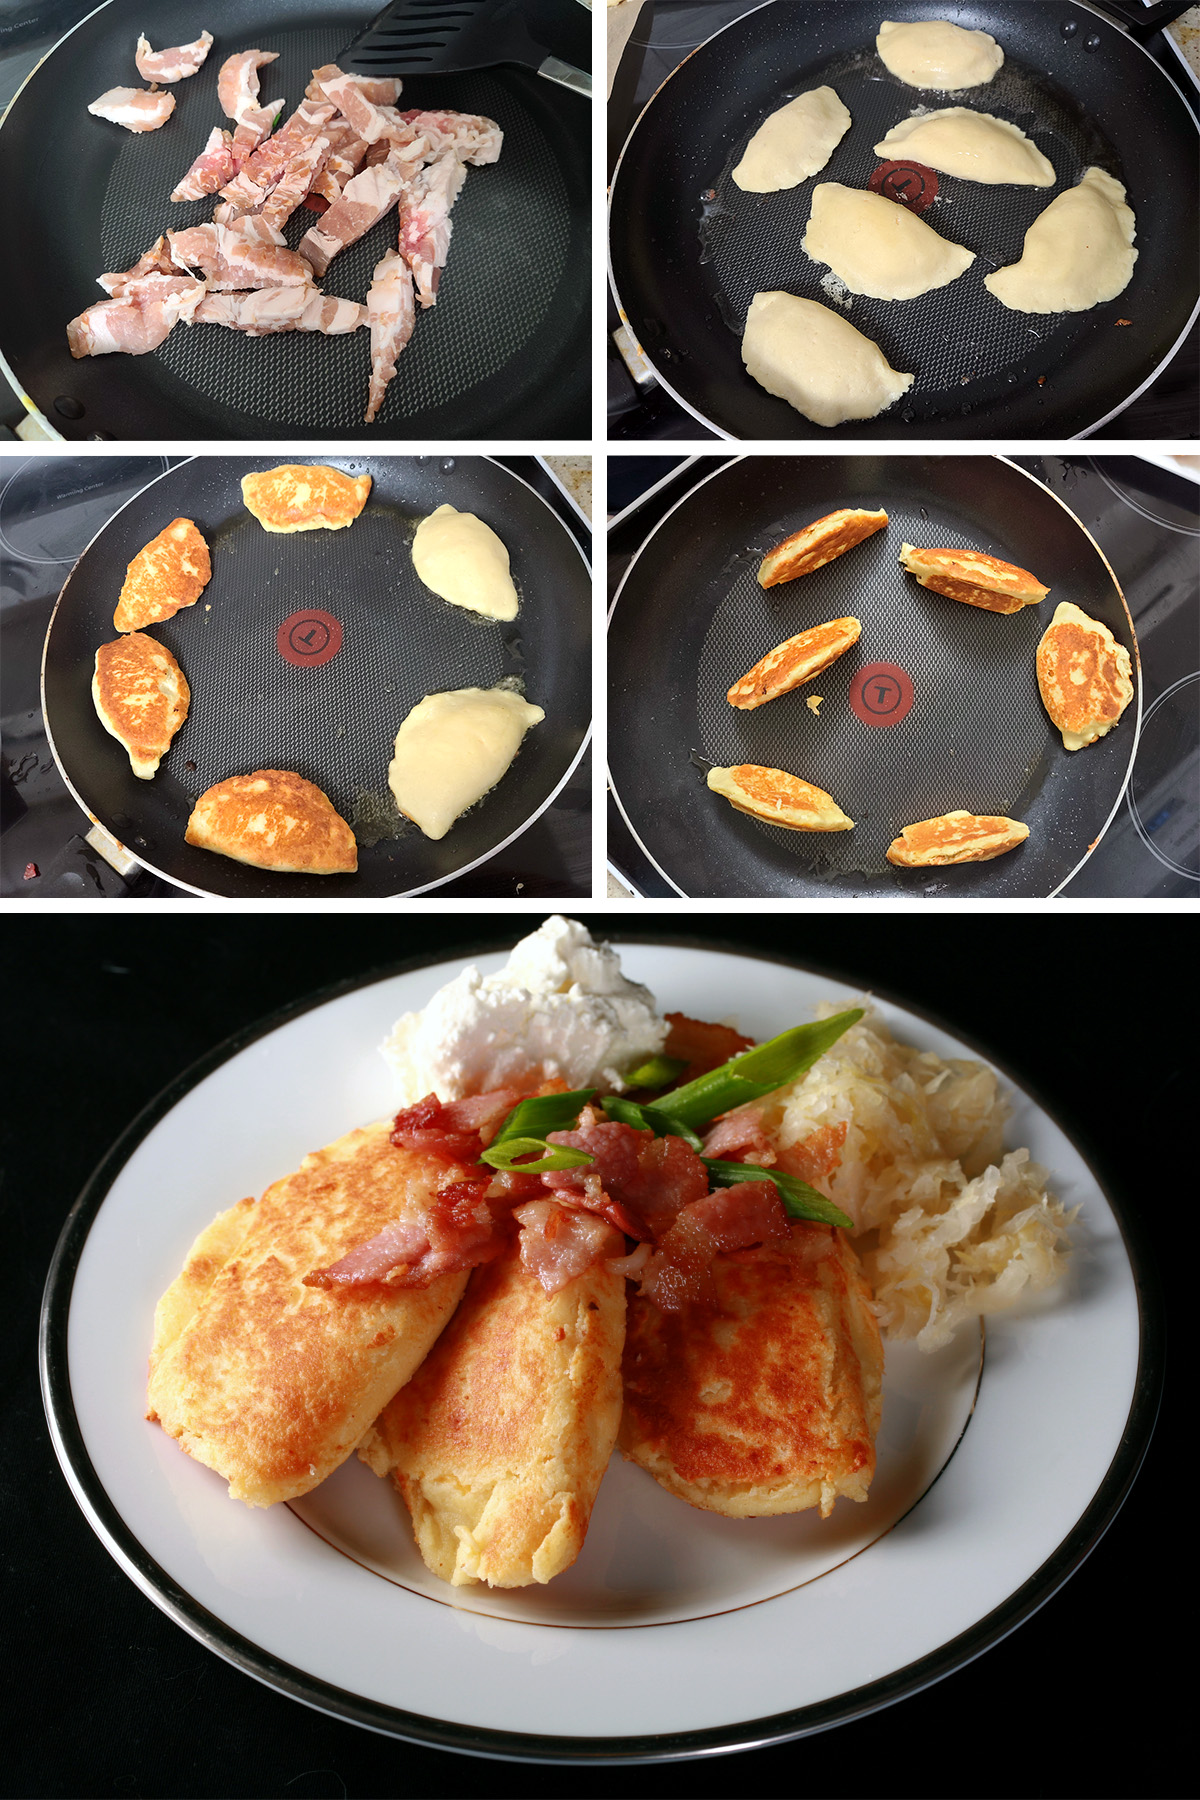 A 5 part image showing keto perogies being fried in a pan, then served on a plate with bacon, sour cream, green onions, and sauerkraut.